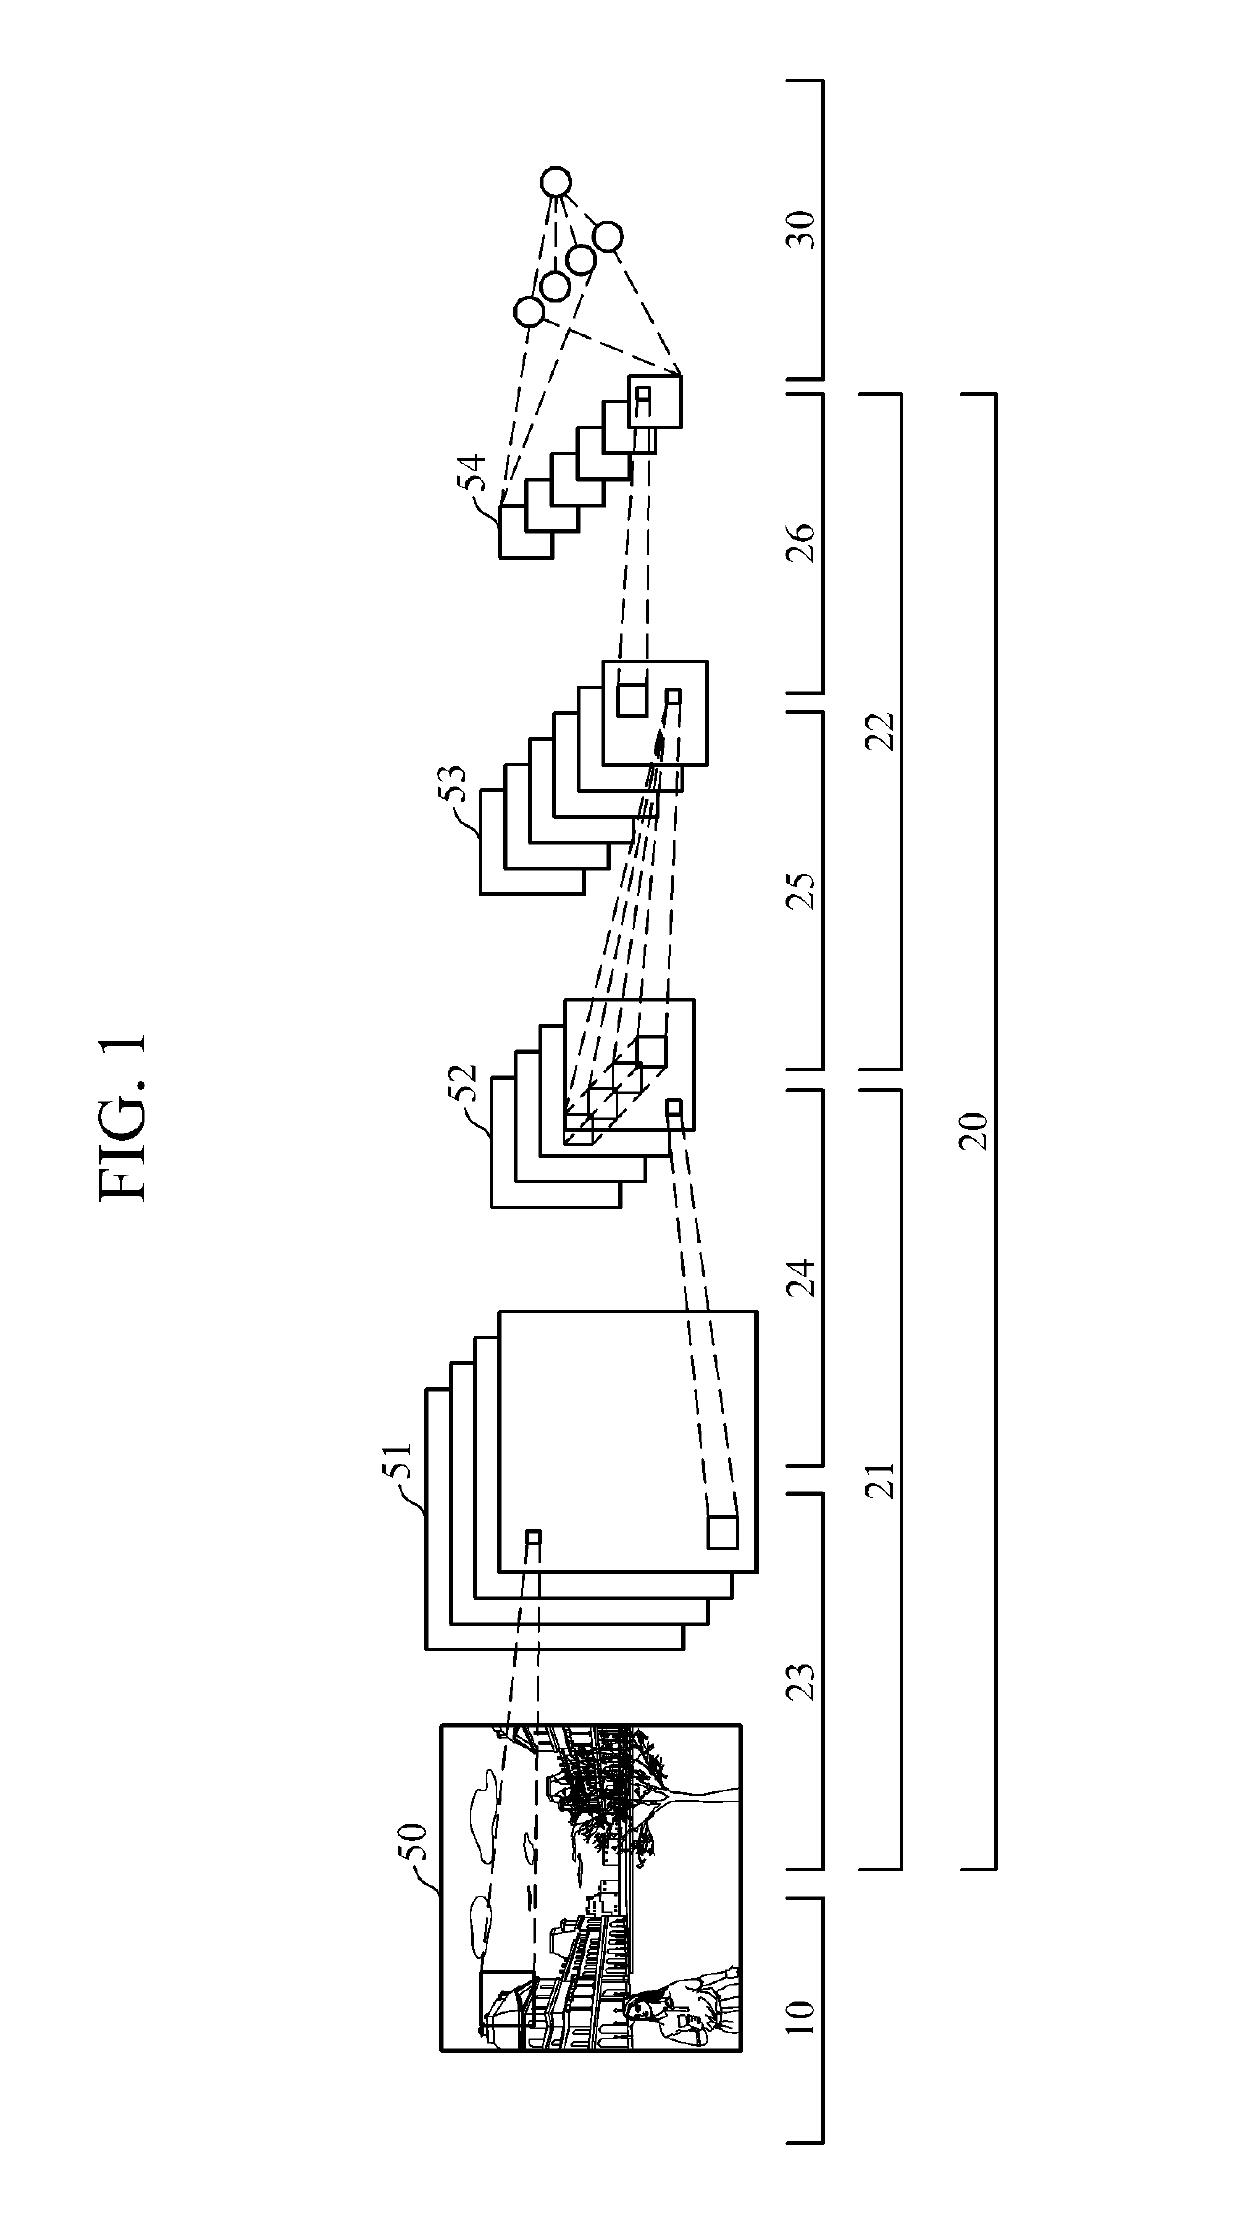 Convolution neural network training apparatus and method thereof